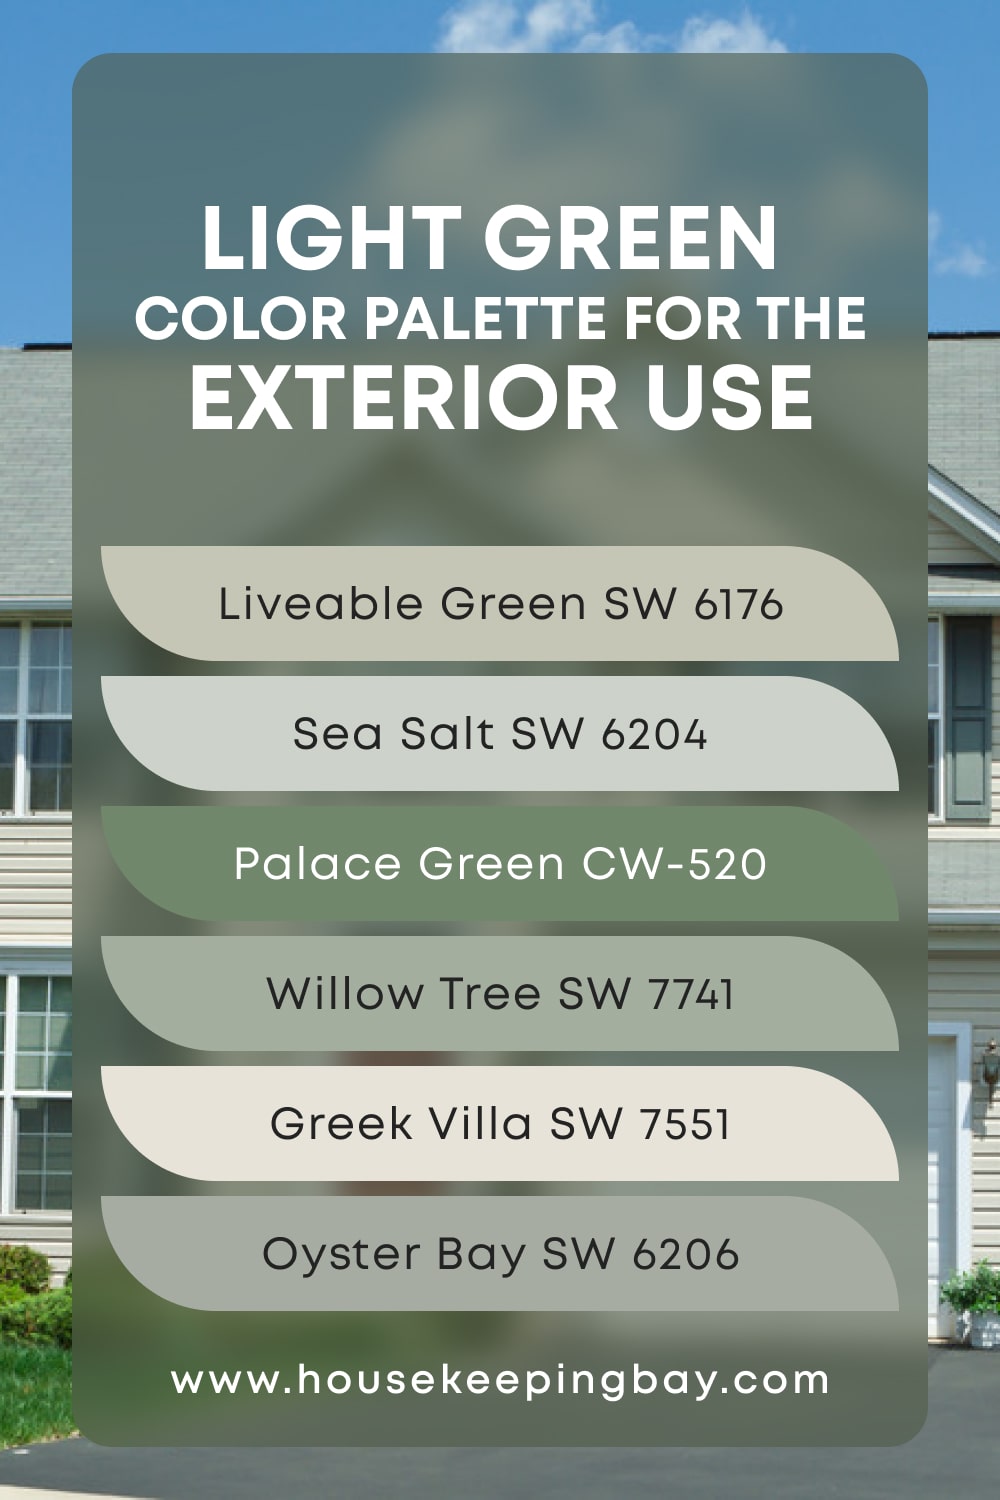 Light Green Color Palette for the Exterior Use